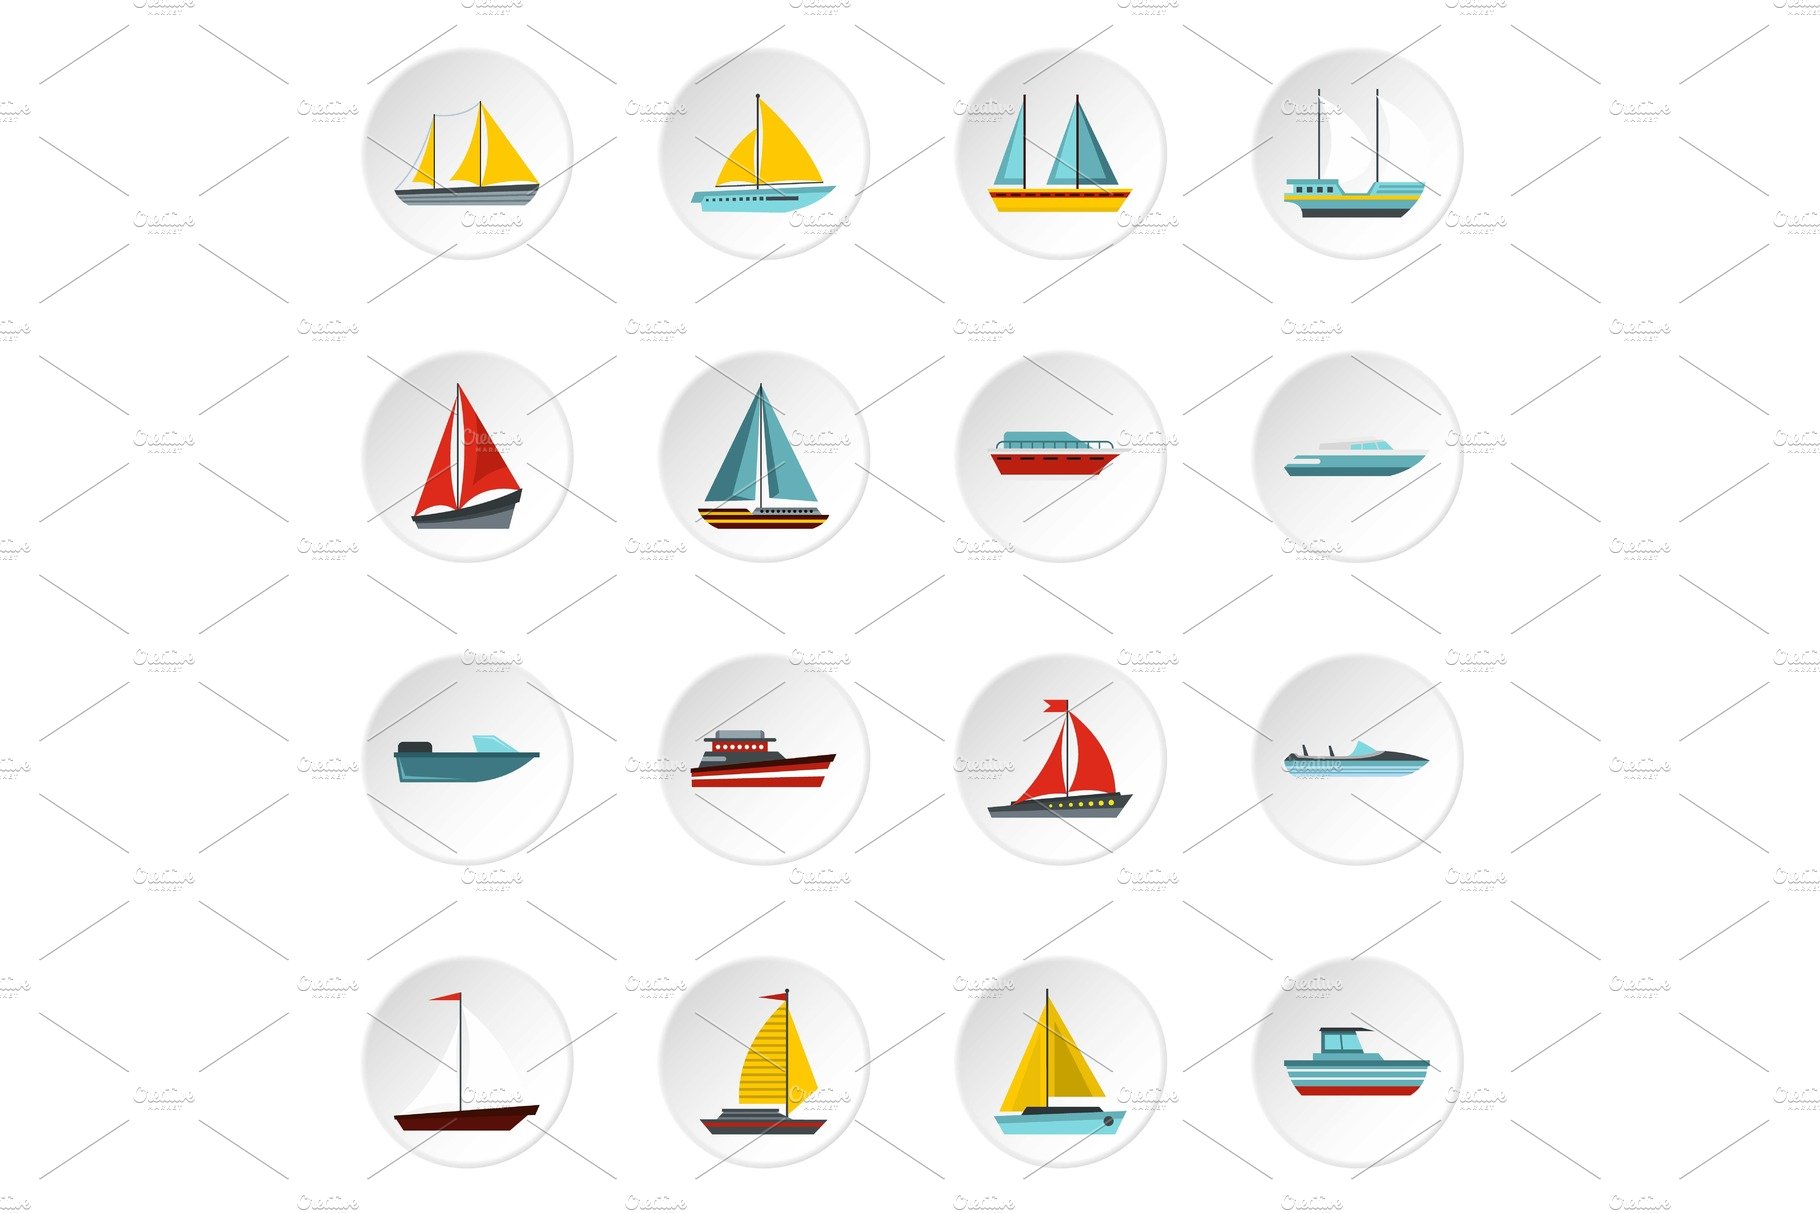 Ship and boat icons set, flat style cover image.